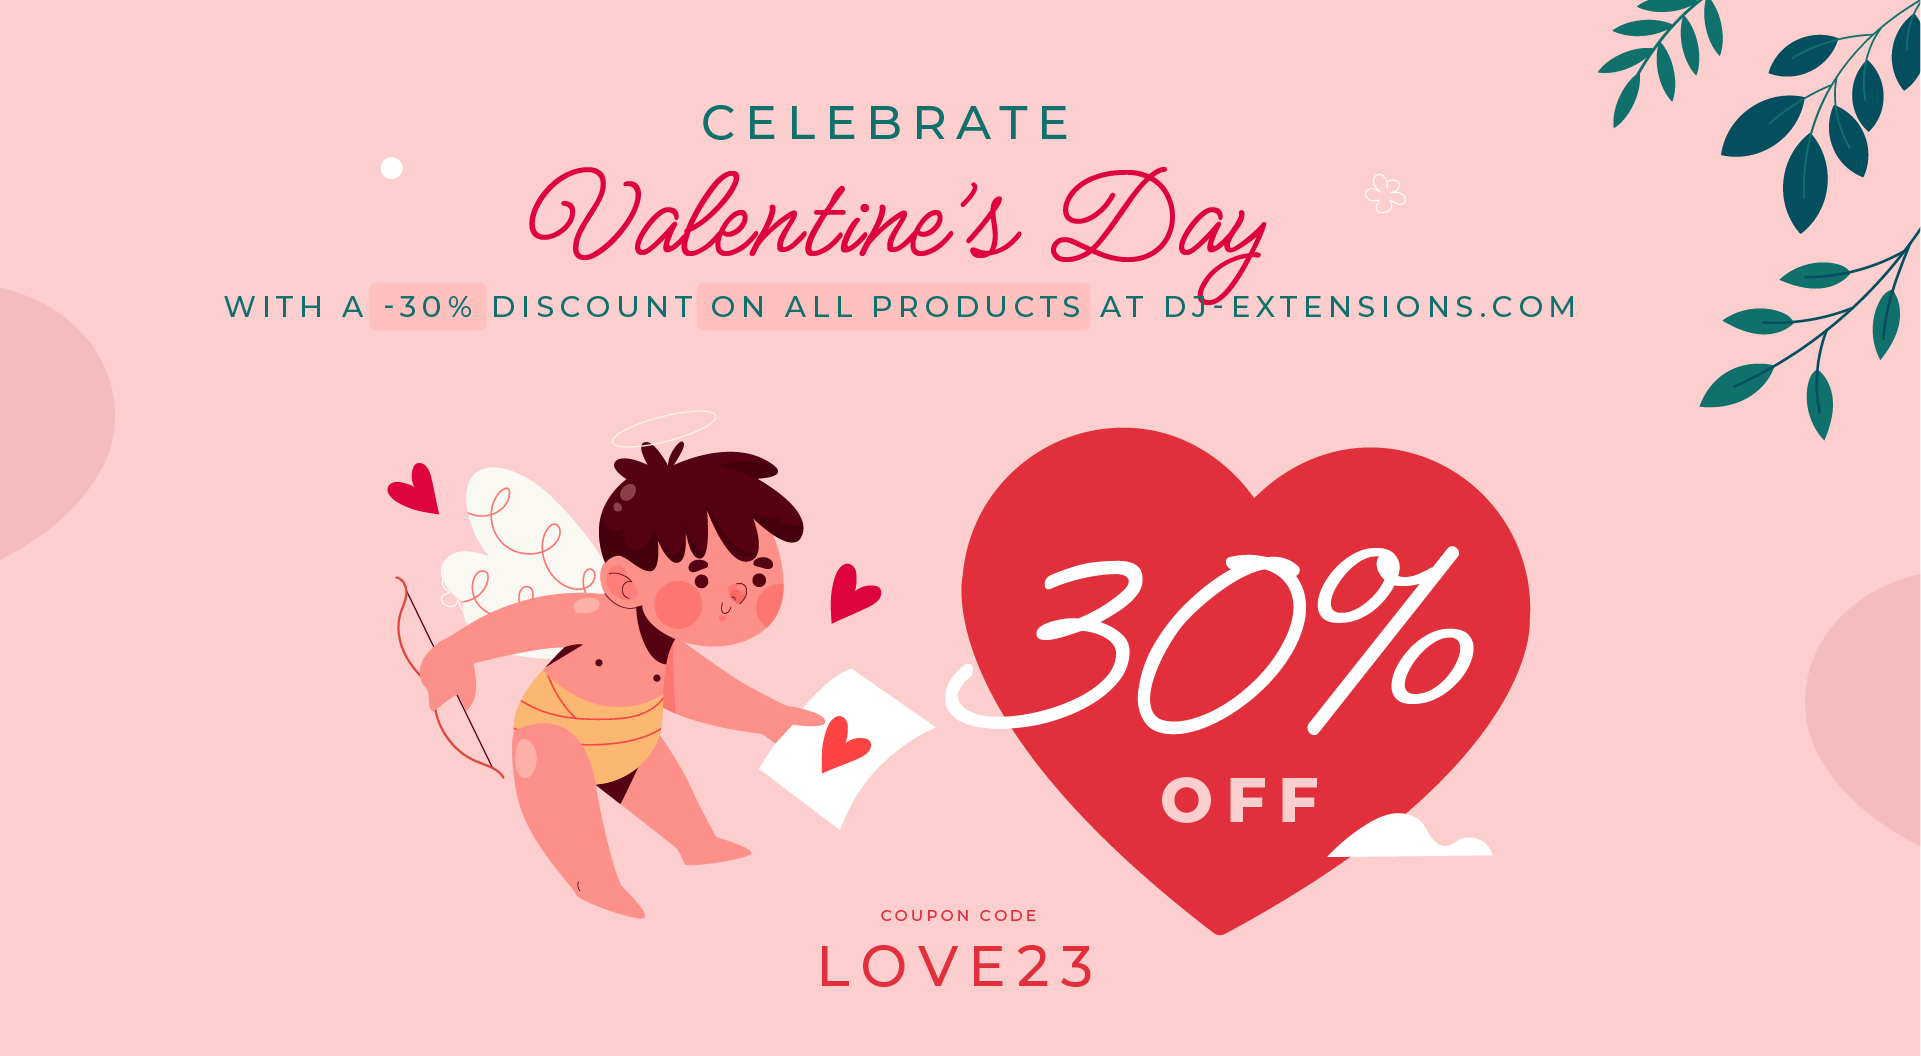 Valentine's Day Sale With Code: LOVE